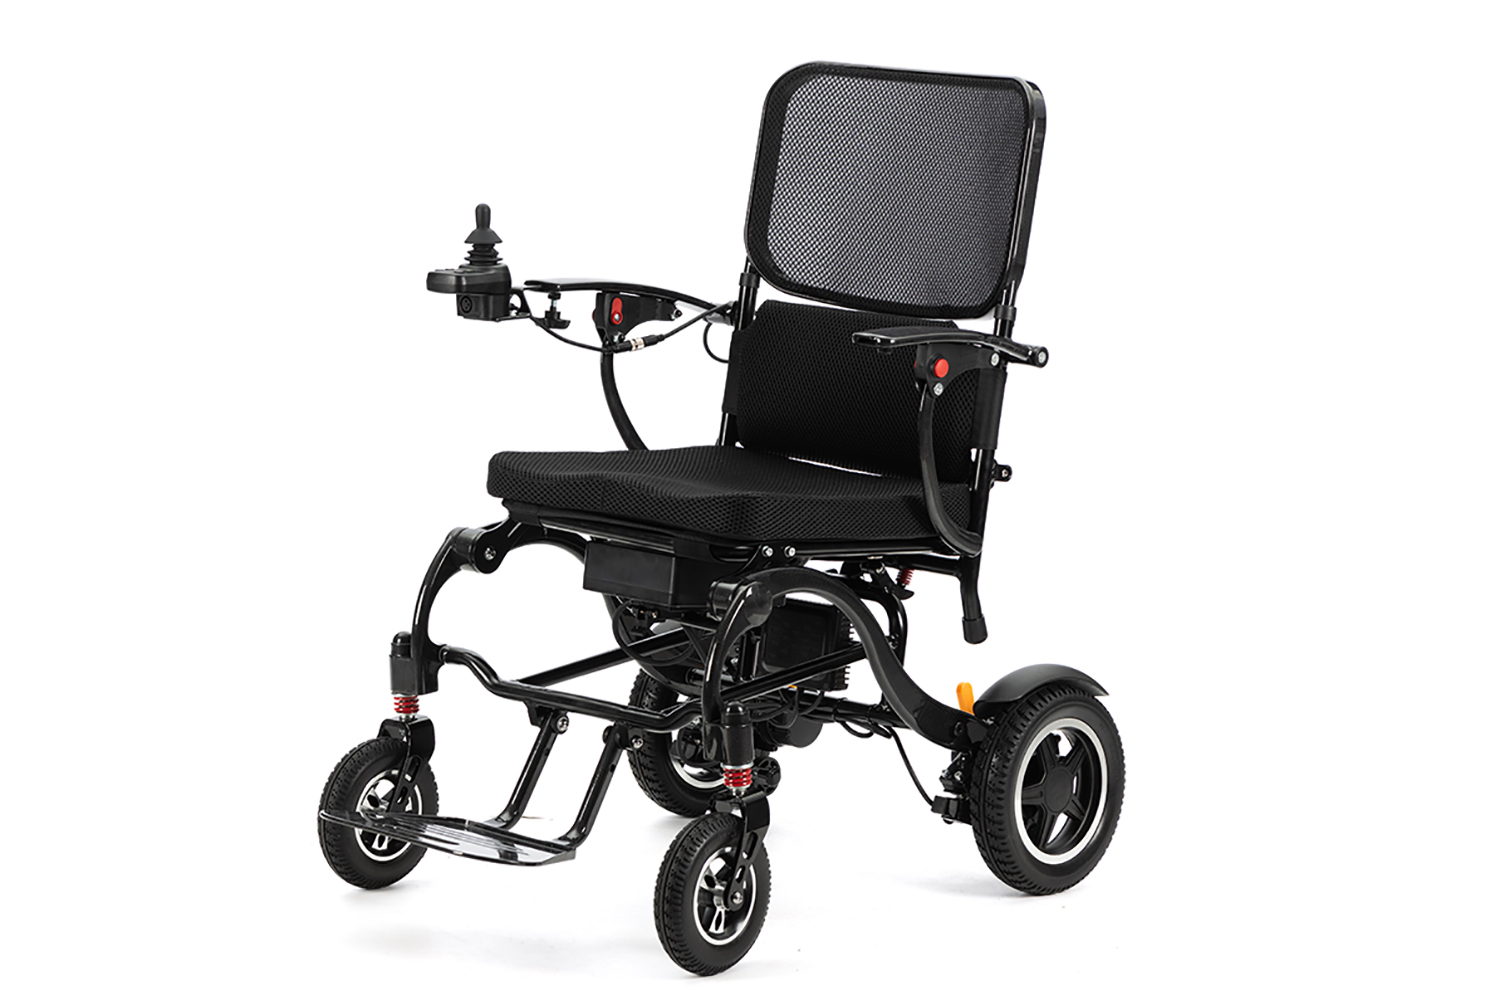 What are the benefits of lightweight folding electric wheelchairs for the elderly to travel?